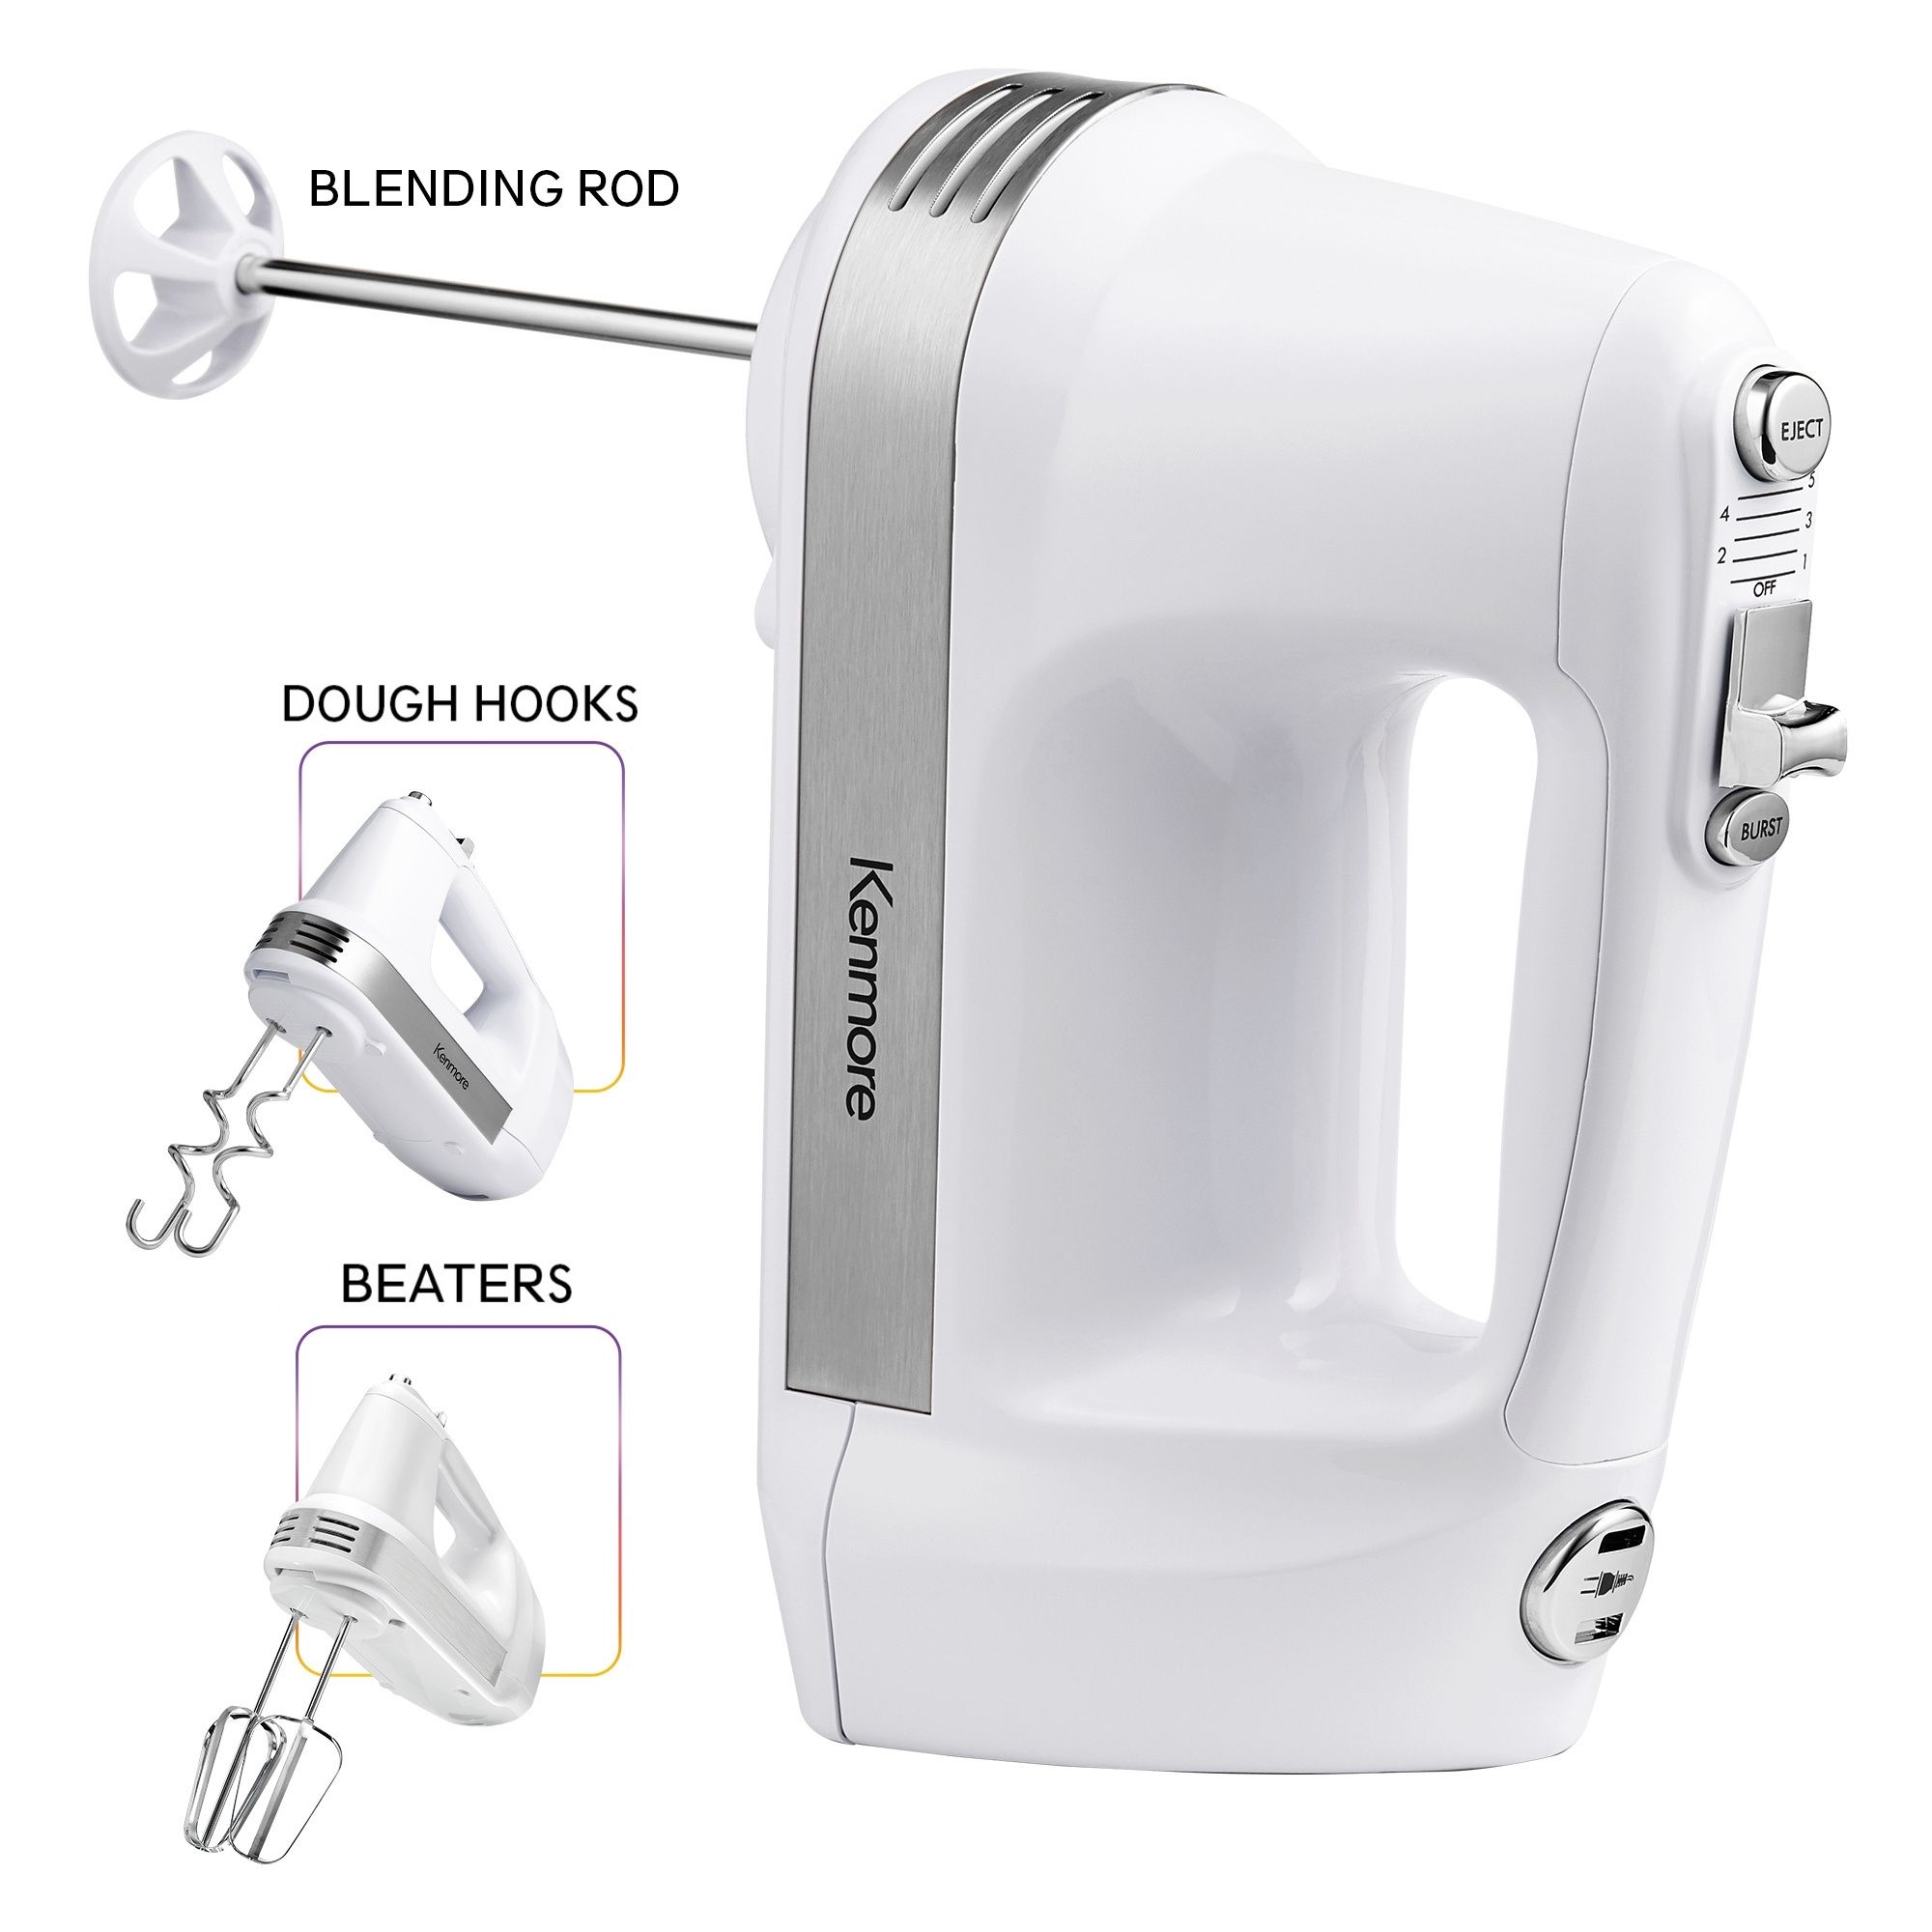 Kenmore 36-in Cord 5-Speed White Hand Mixer in the Hand Mixers department  at